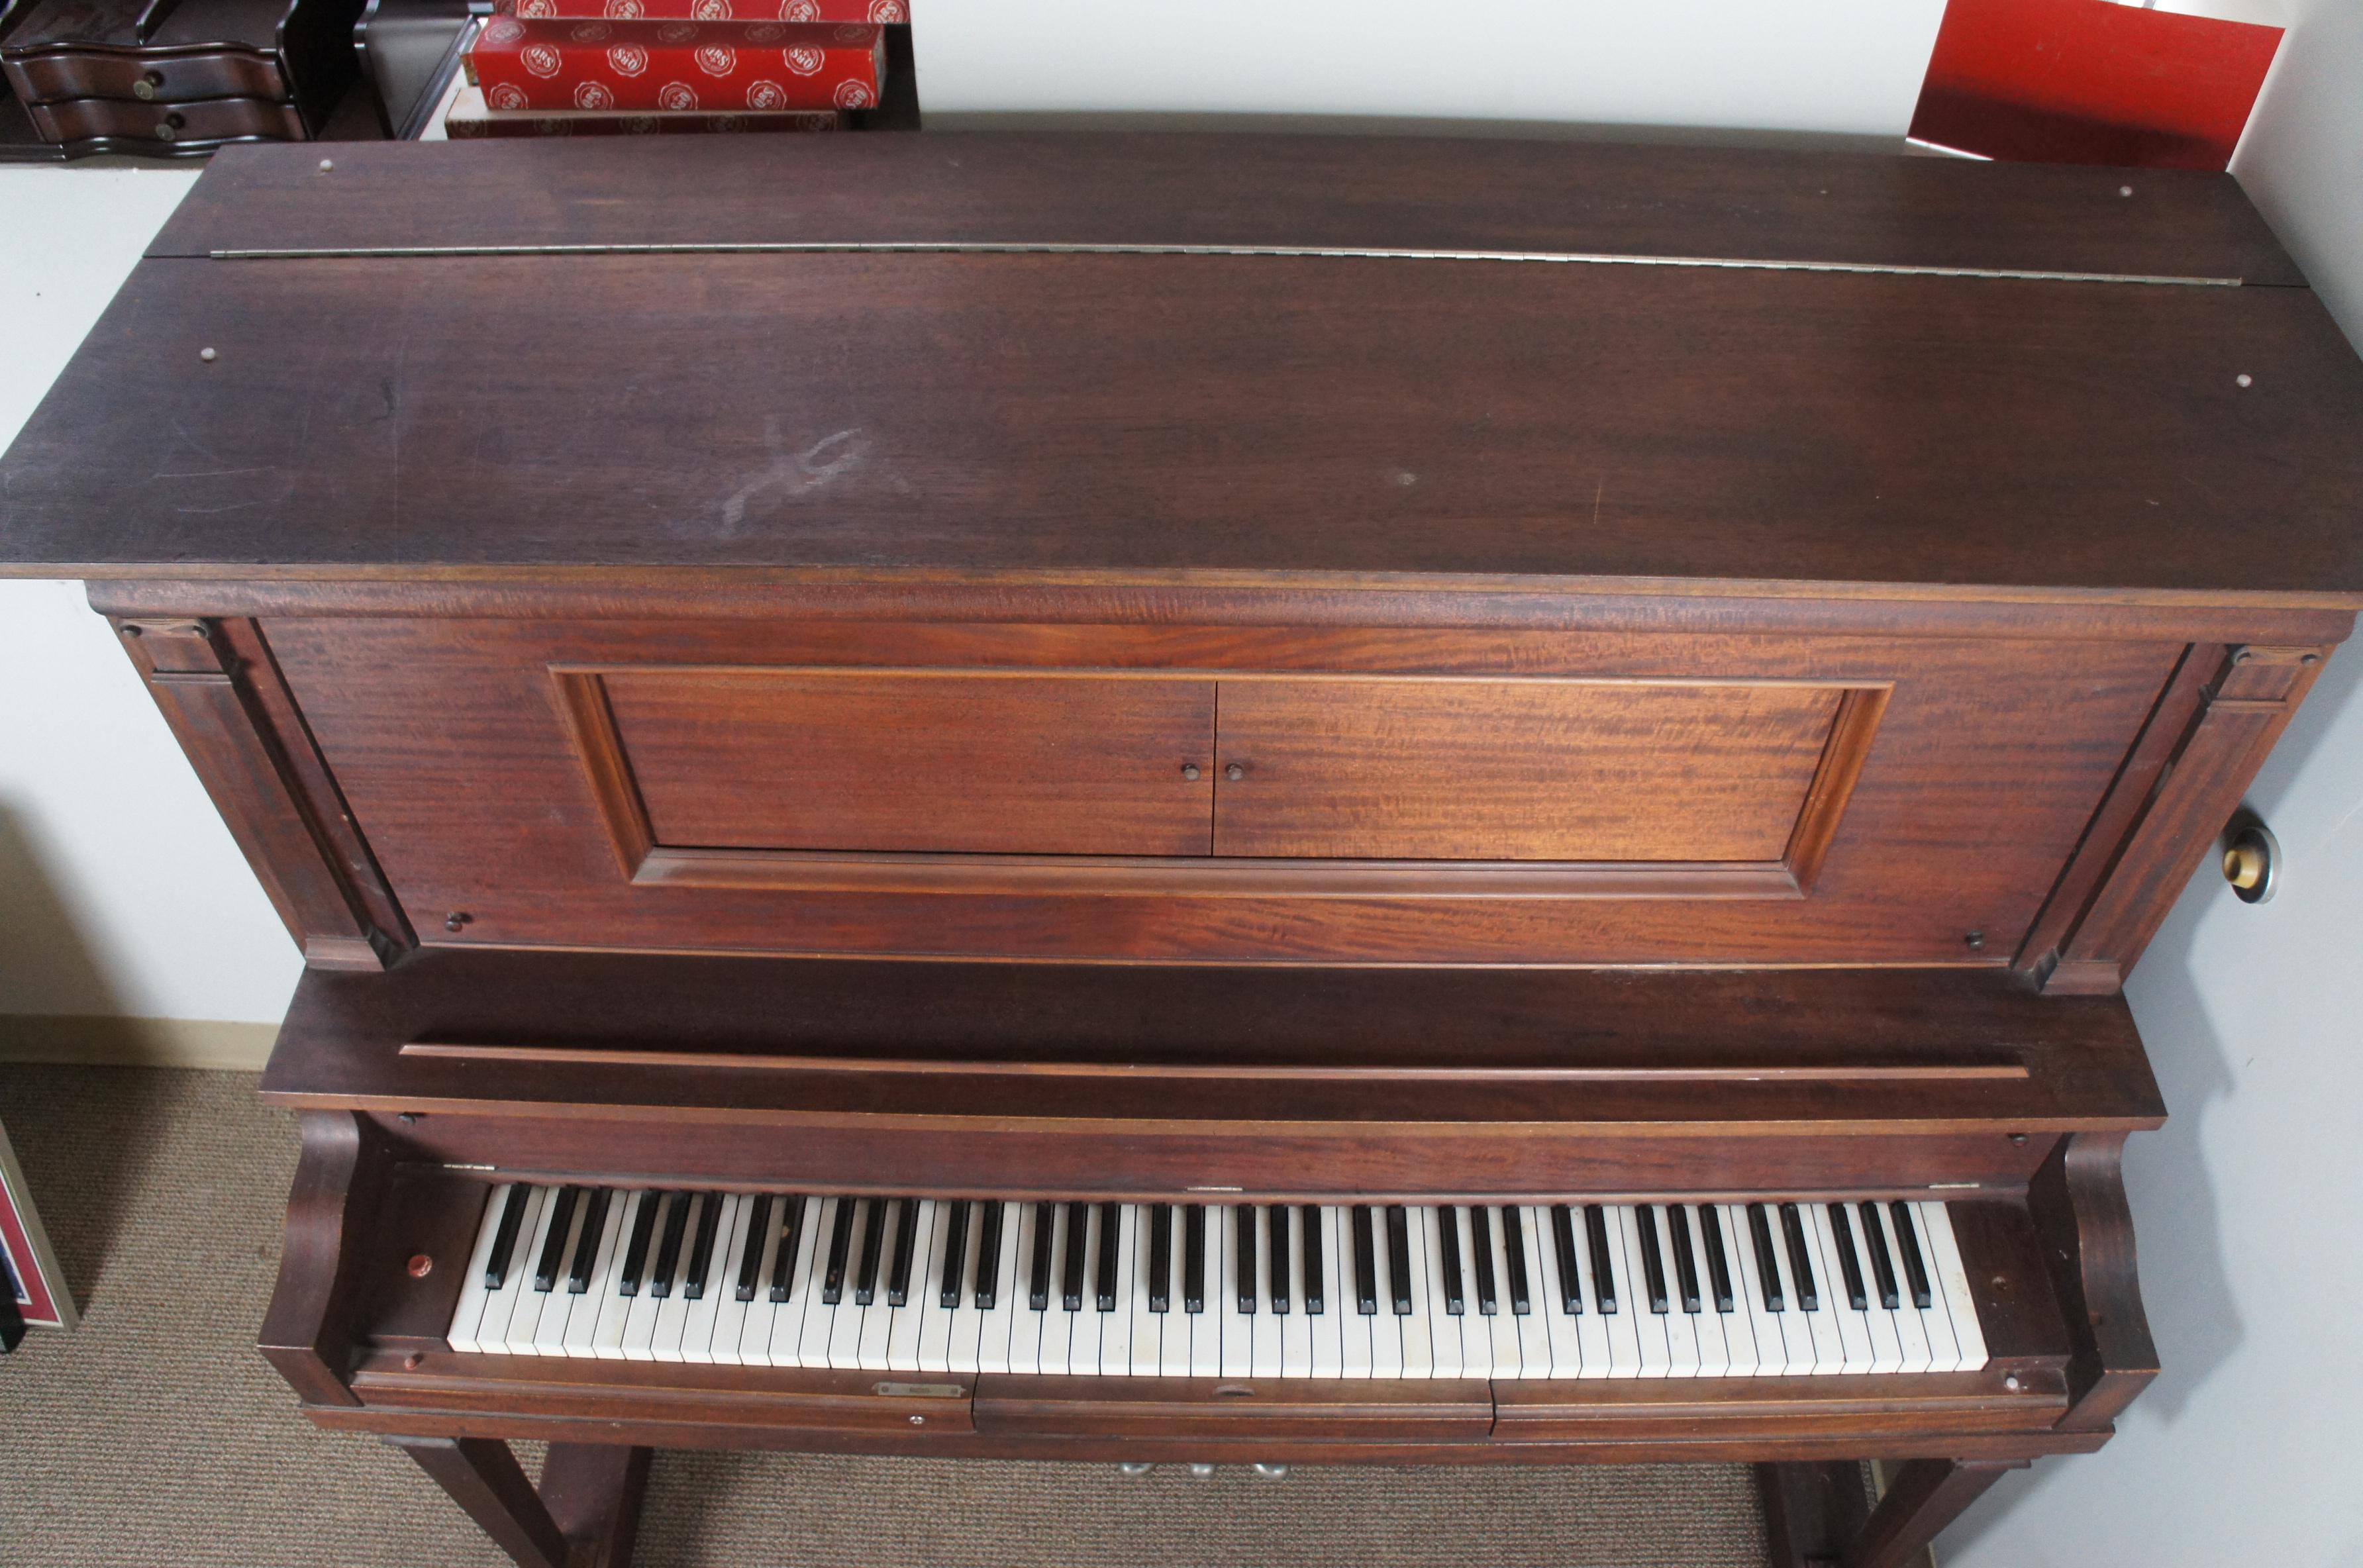 Antique 1915 Mahogany Chicago Cable Company Carolina Inner Player Upright Piano  For Sale 3